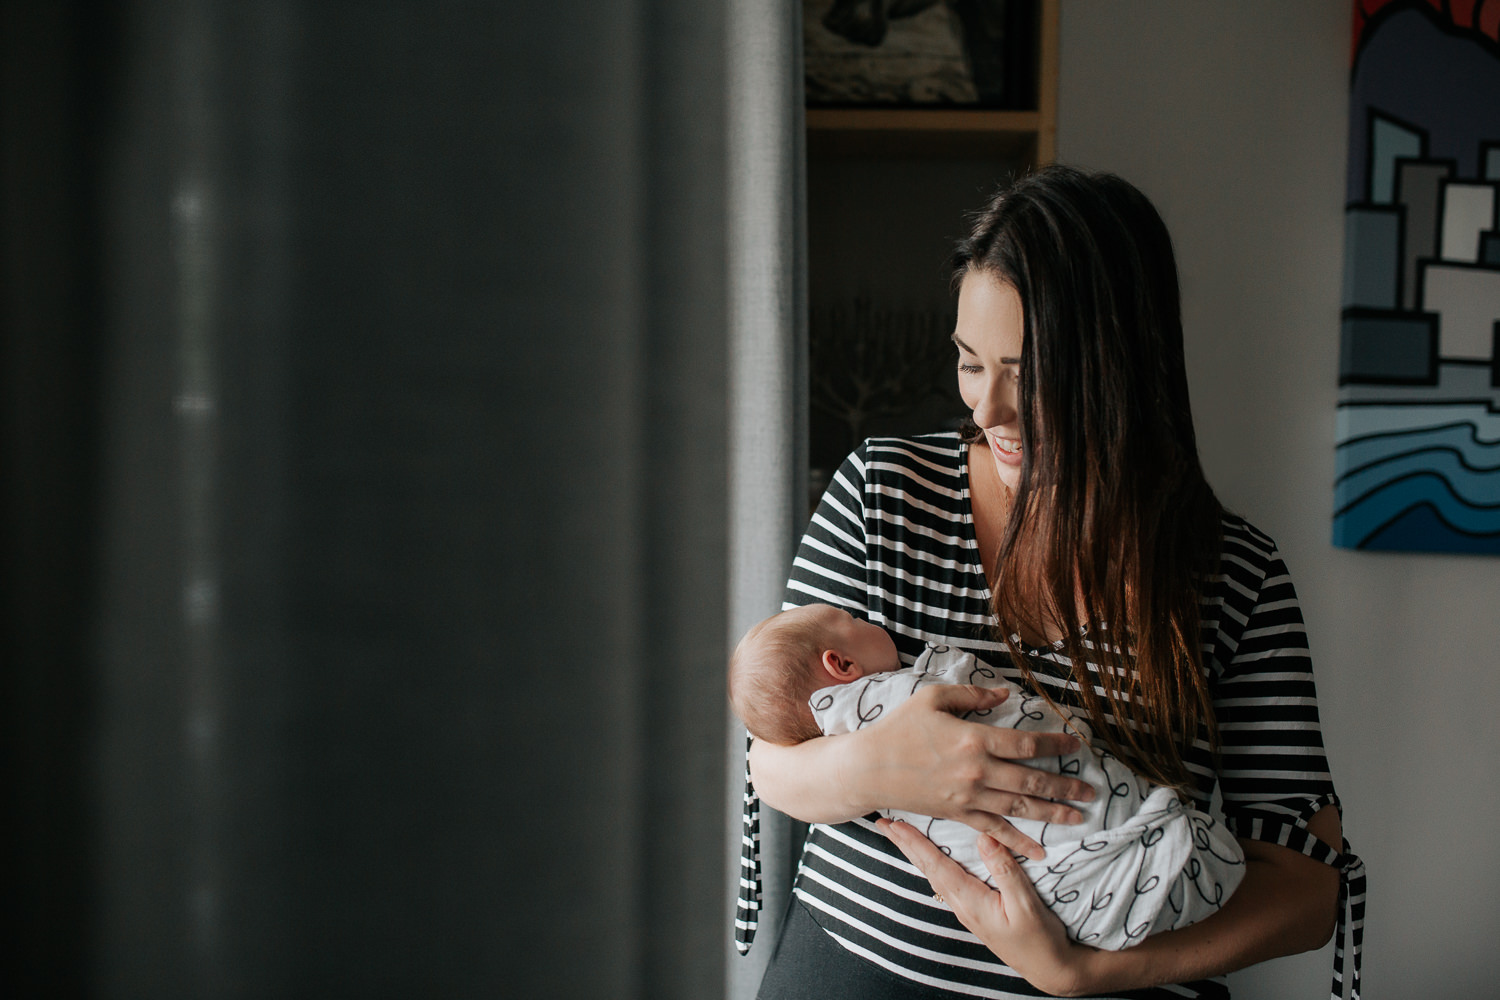 new mom in striped top with long dark brown hair standing next to window holding 2 week old baby girl with light hair who is sleeping in her arms, smiling at daughter - Stouffville In-Home Photography